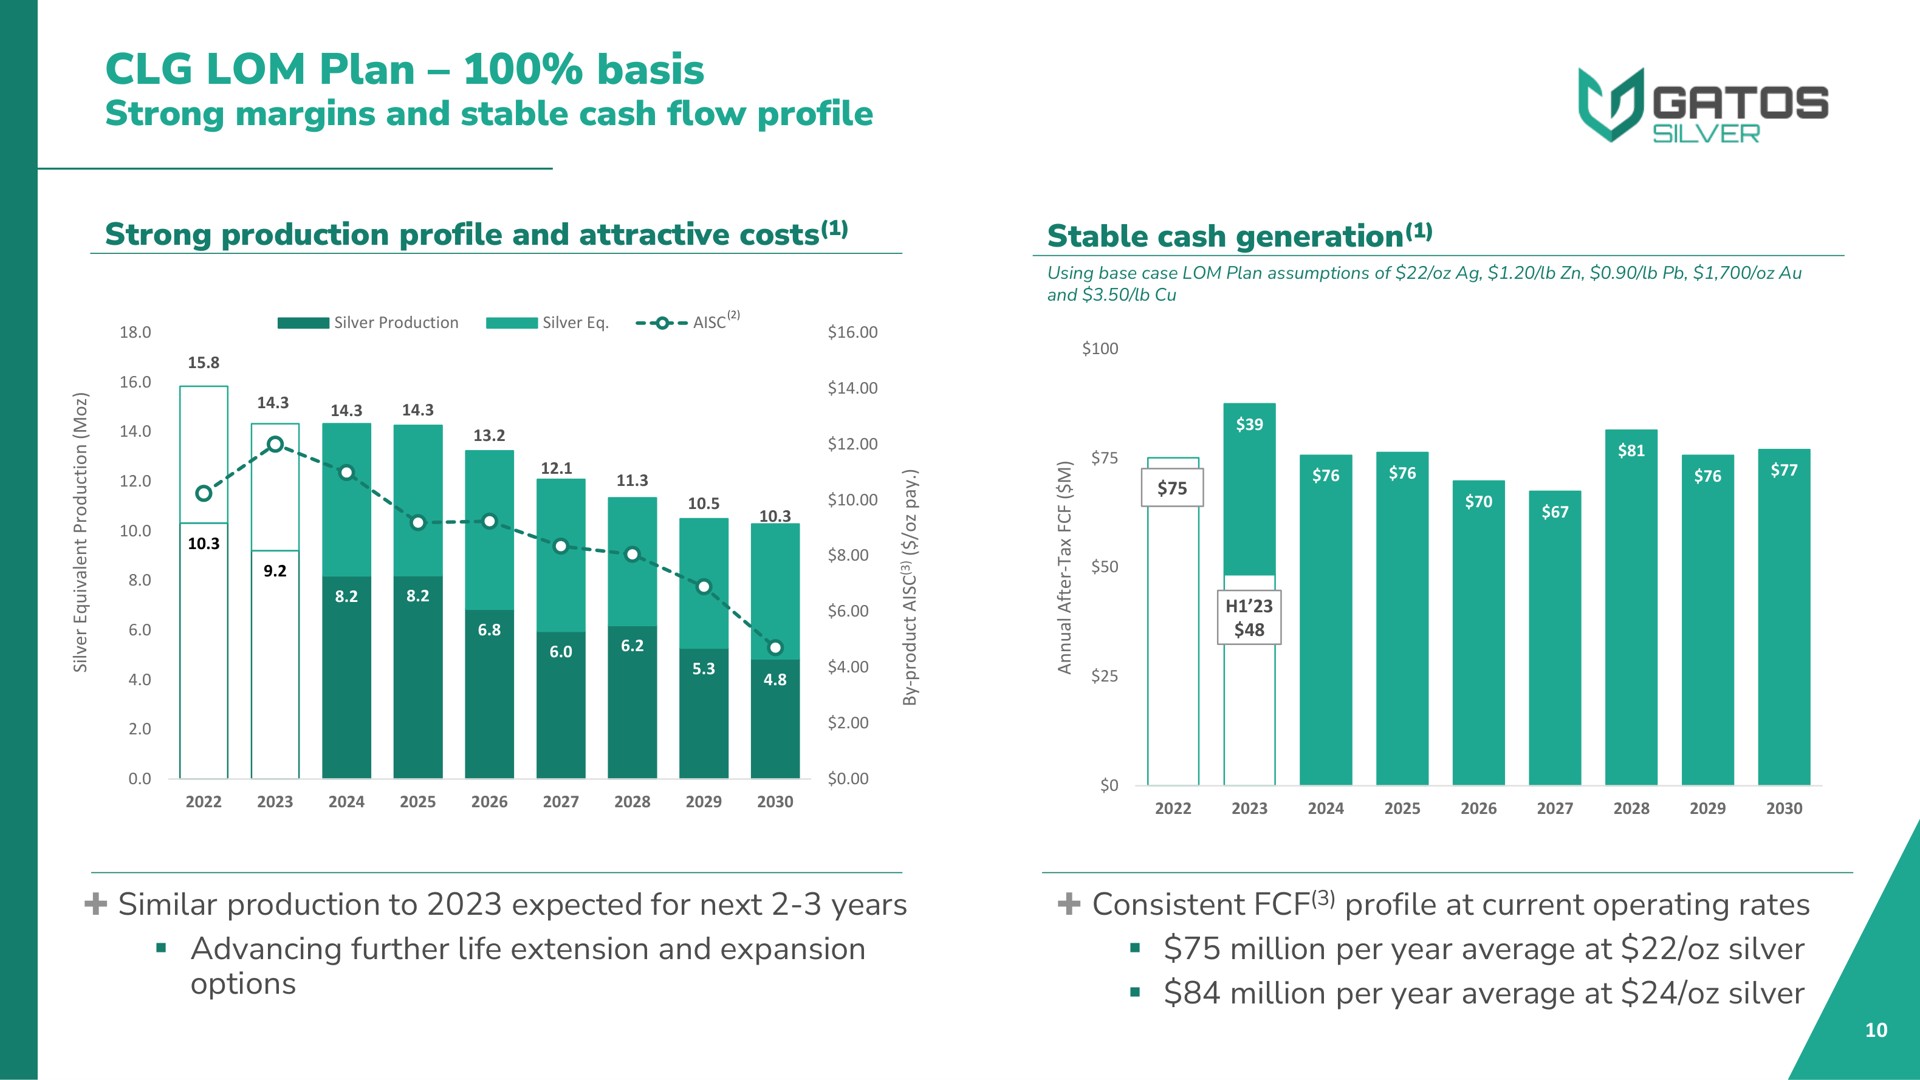 plan basis strong margins and stable cash flow profile | Gatos Silver